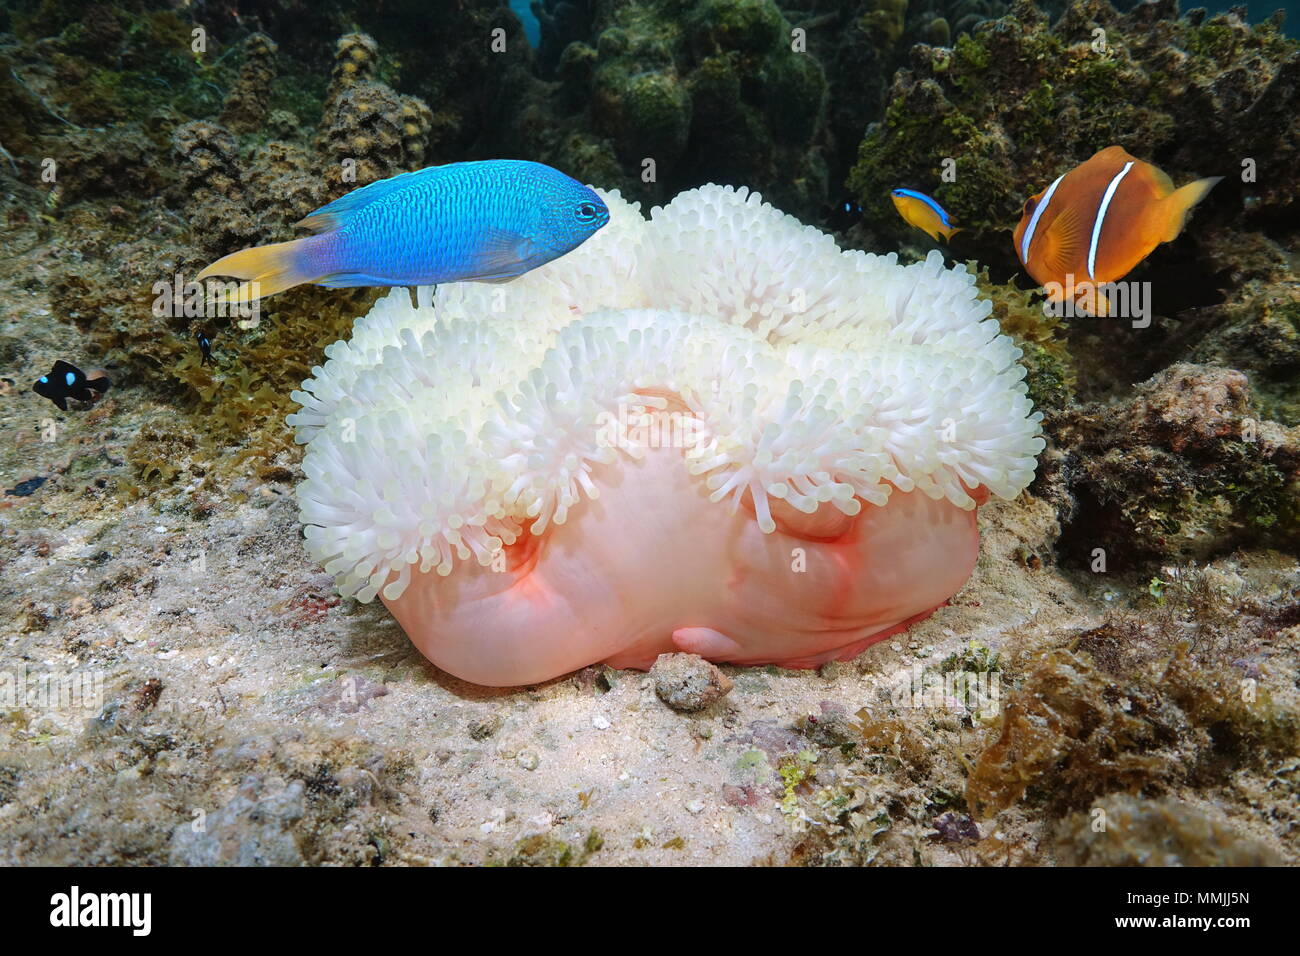 Marine life, a Magnificent sea anemone, Heteractis magnifica, with colorful tropical fish, Bora Bora, Pacific ocean, French Polynesia Stock Photo